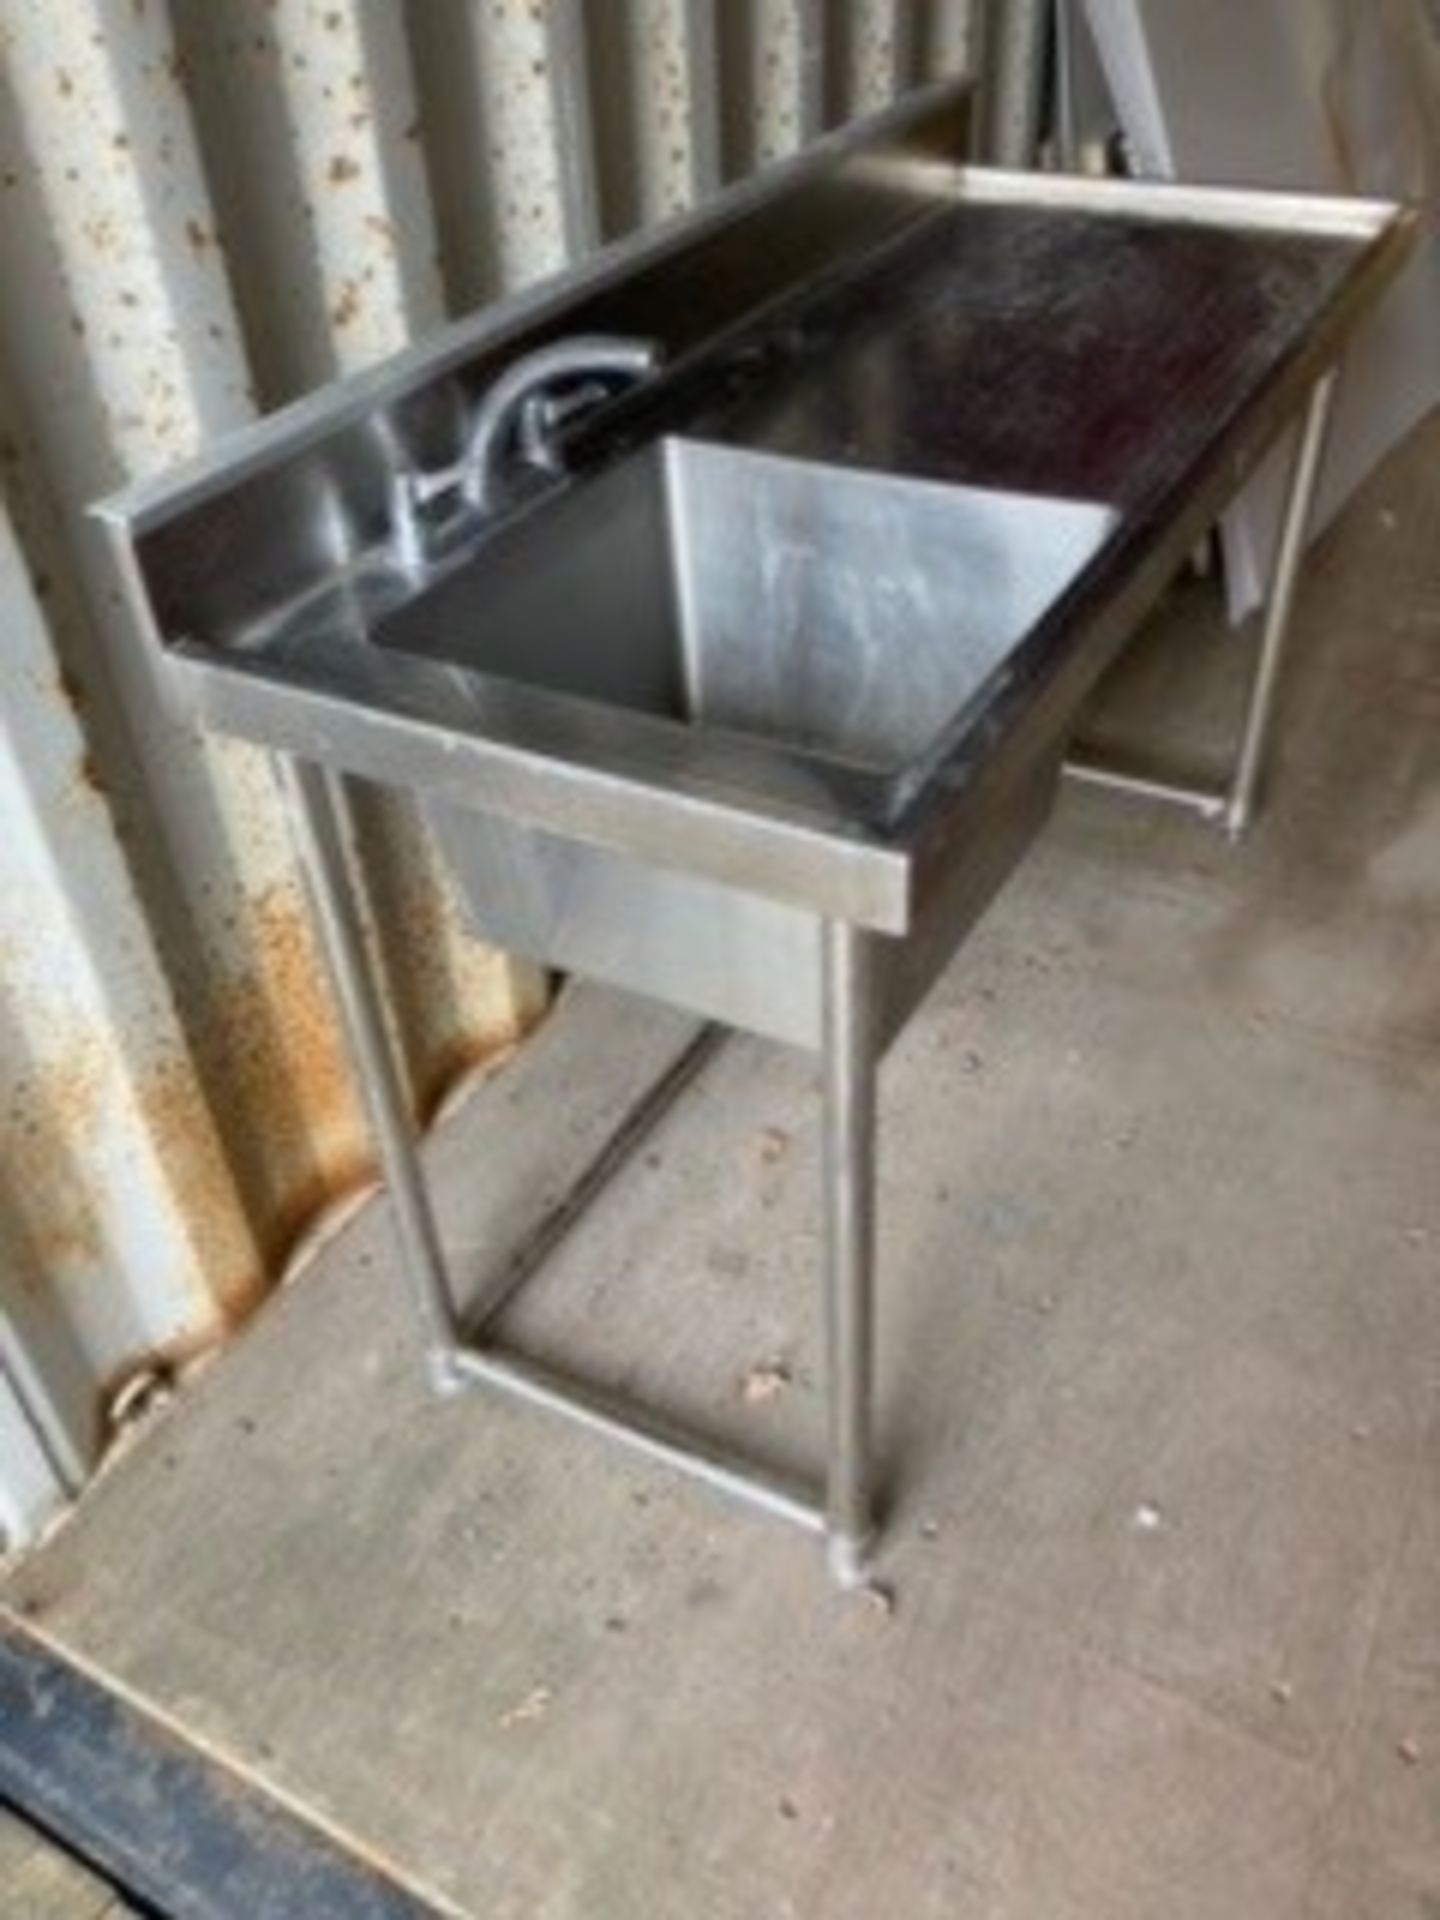 Simply Stainless Steel Sink Unit